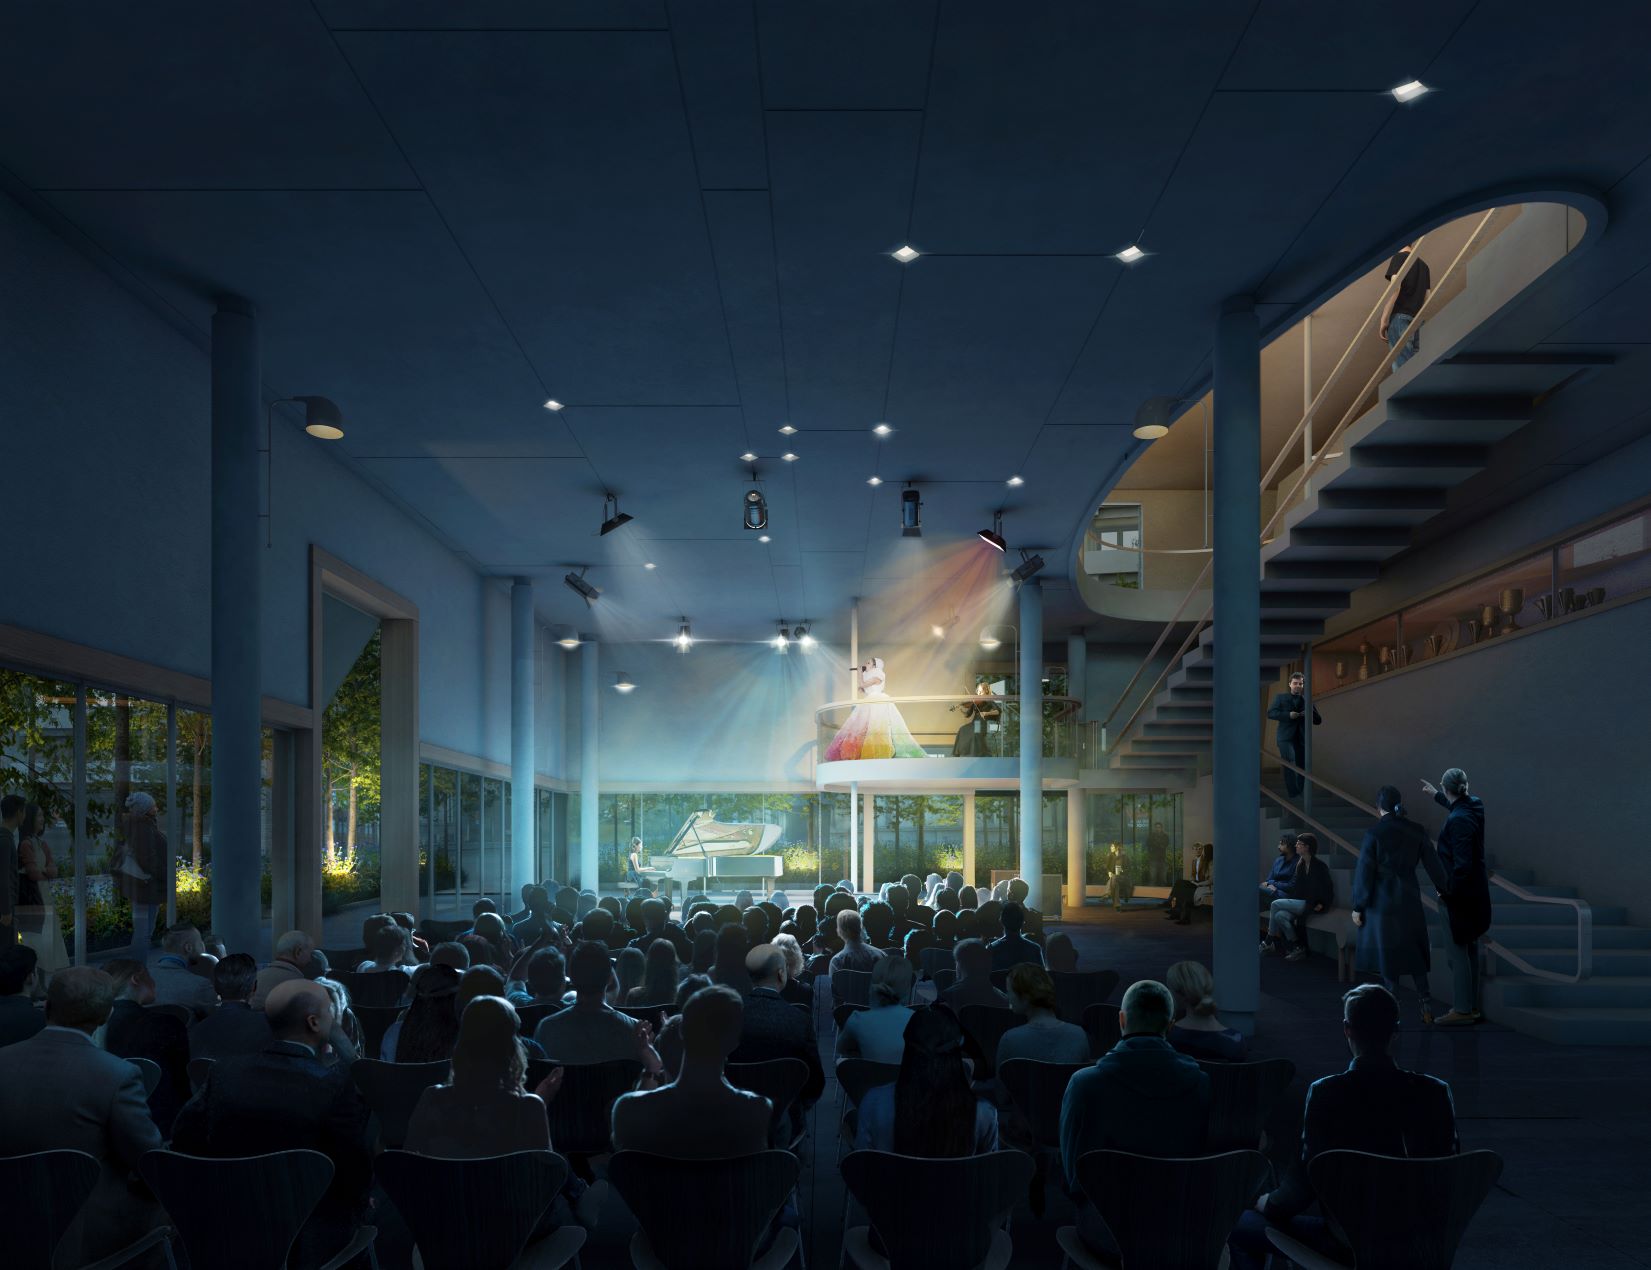 A render of the inside of alumni house nighttime